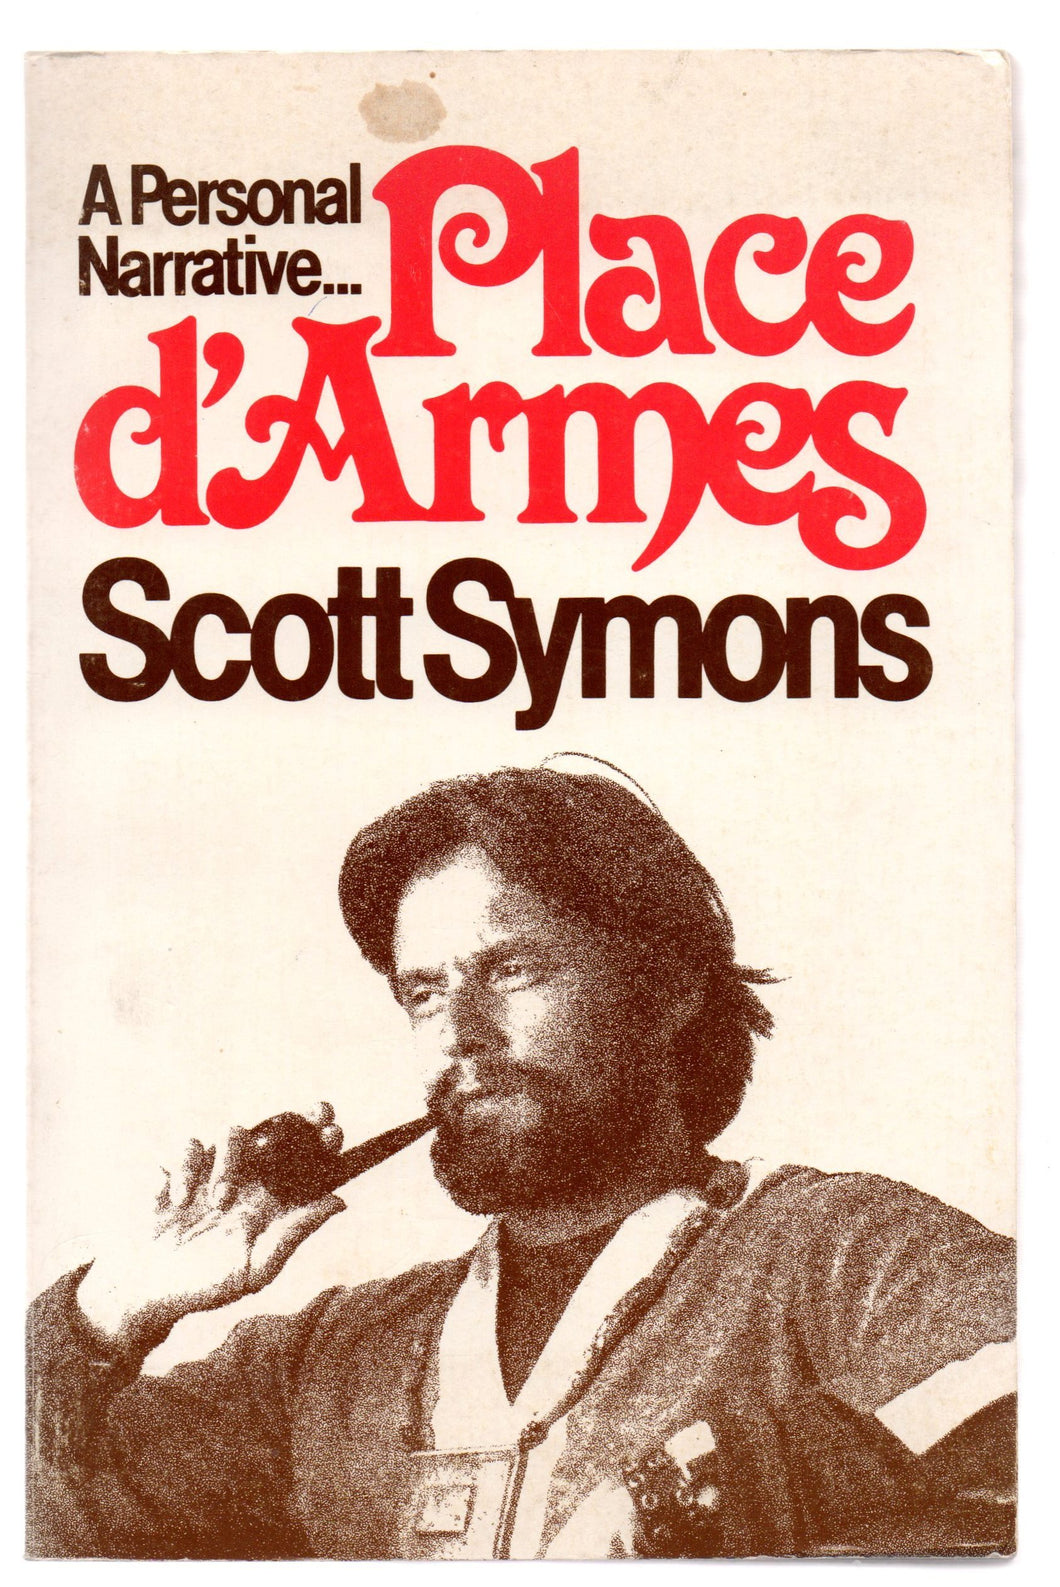 Journal for Place D'Armes: A Personal Narrative by Scott Symons